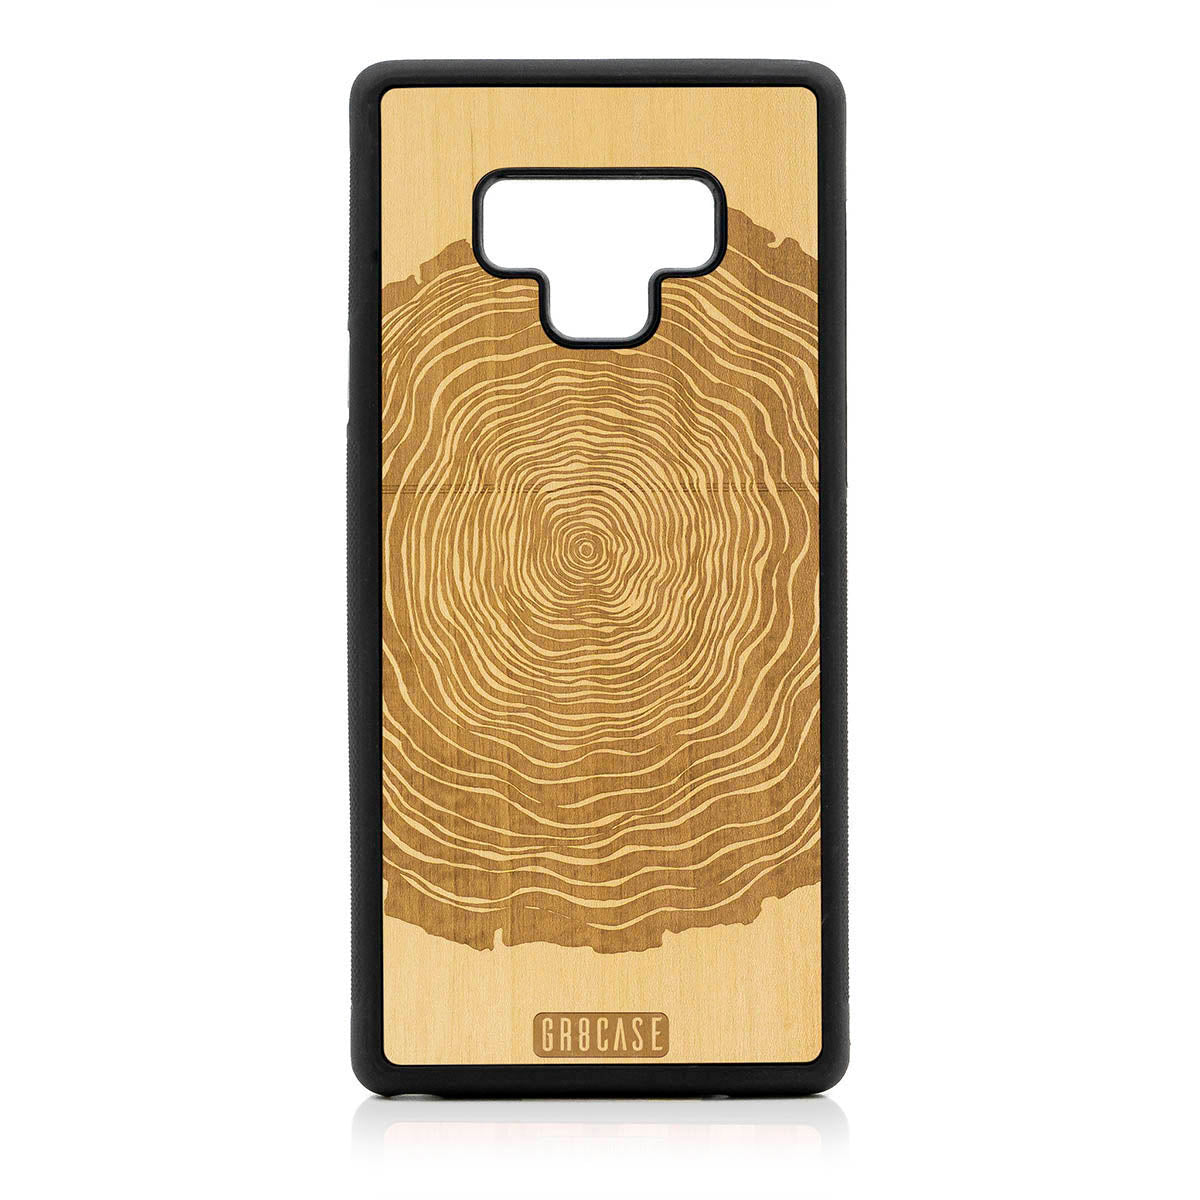 Tree Rings Design Wood Case For Samsung Galaxy Note 9